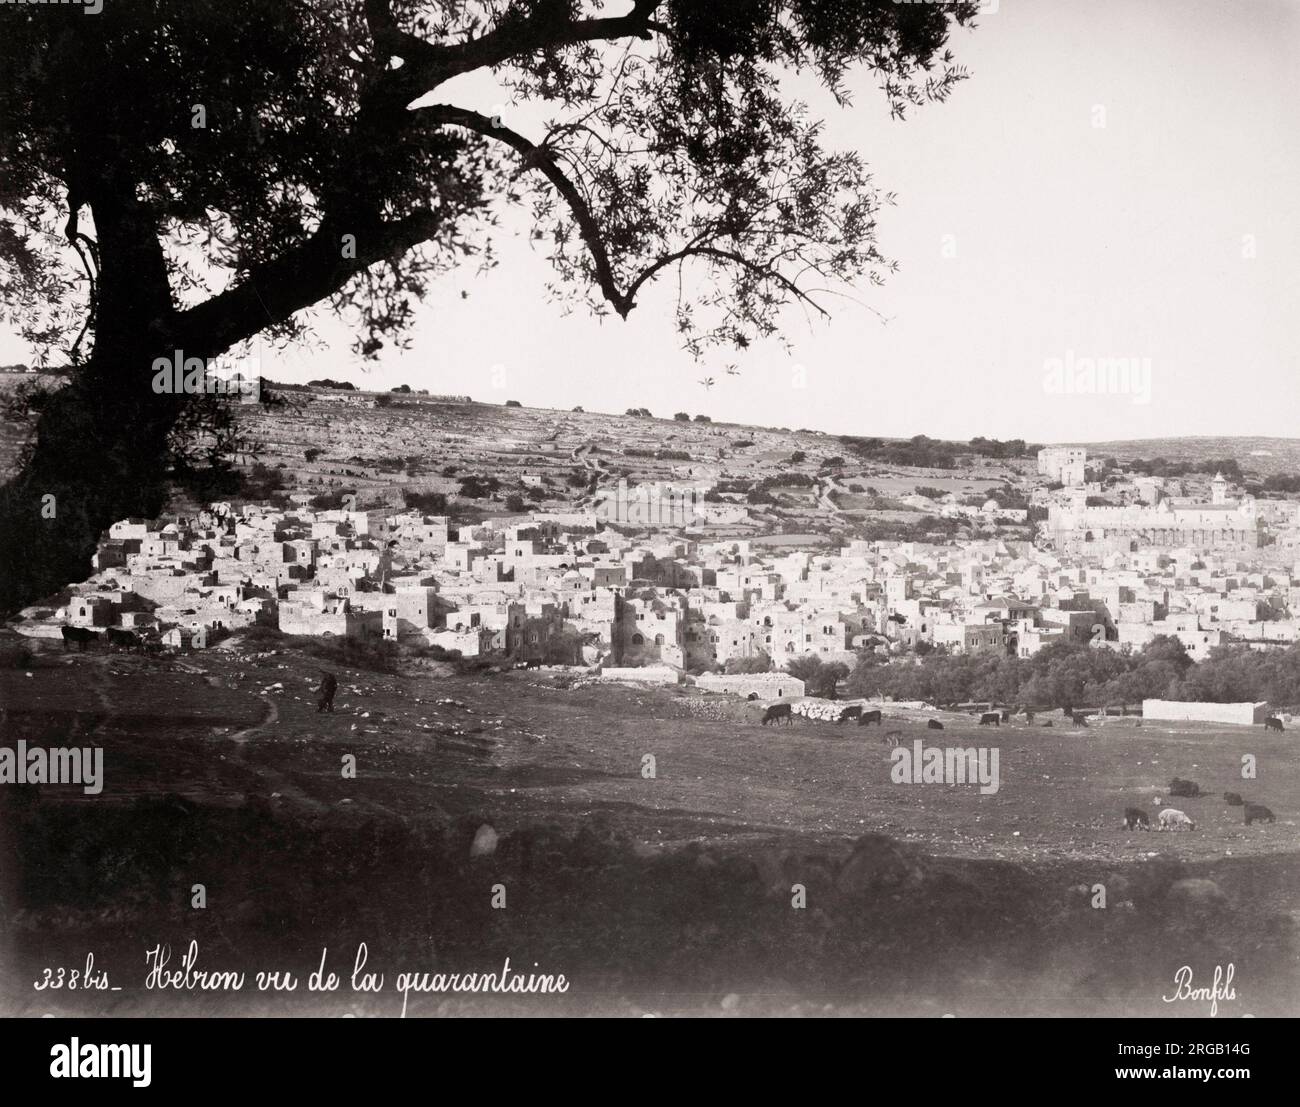 Vintage 19th century photograph: view of the city of Hebron, Holy Land, Palestine, modern West Bank. Stock Photo